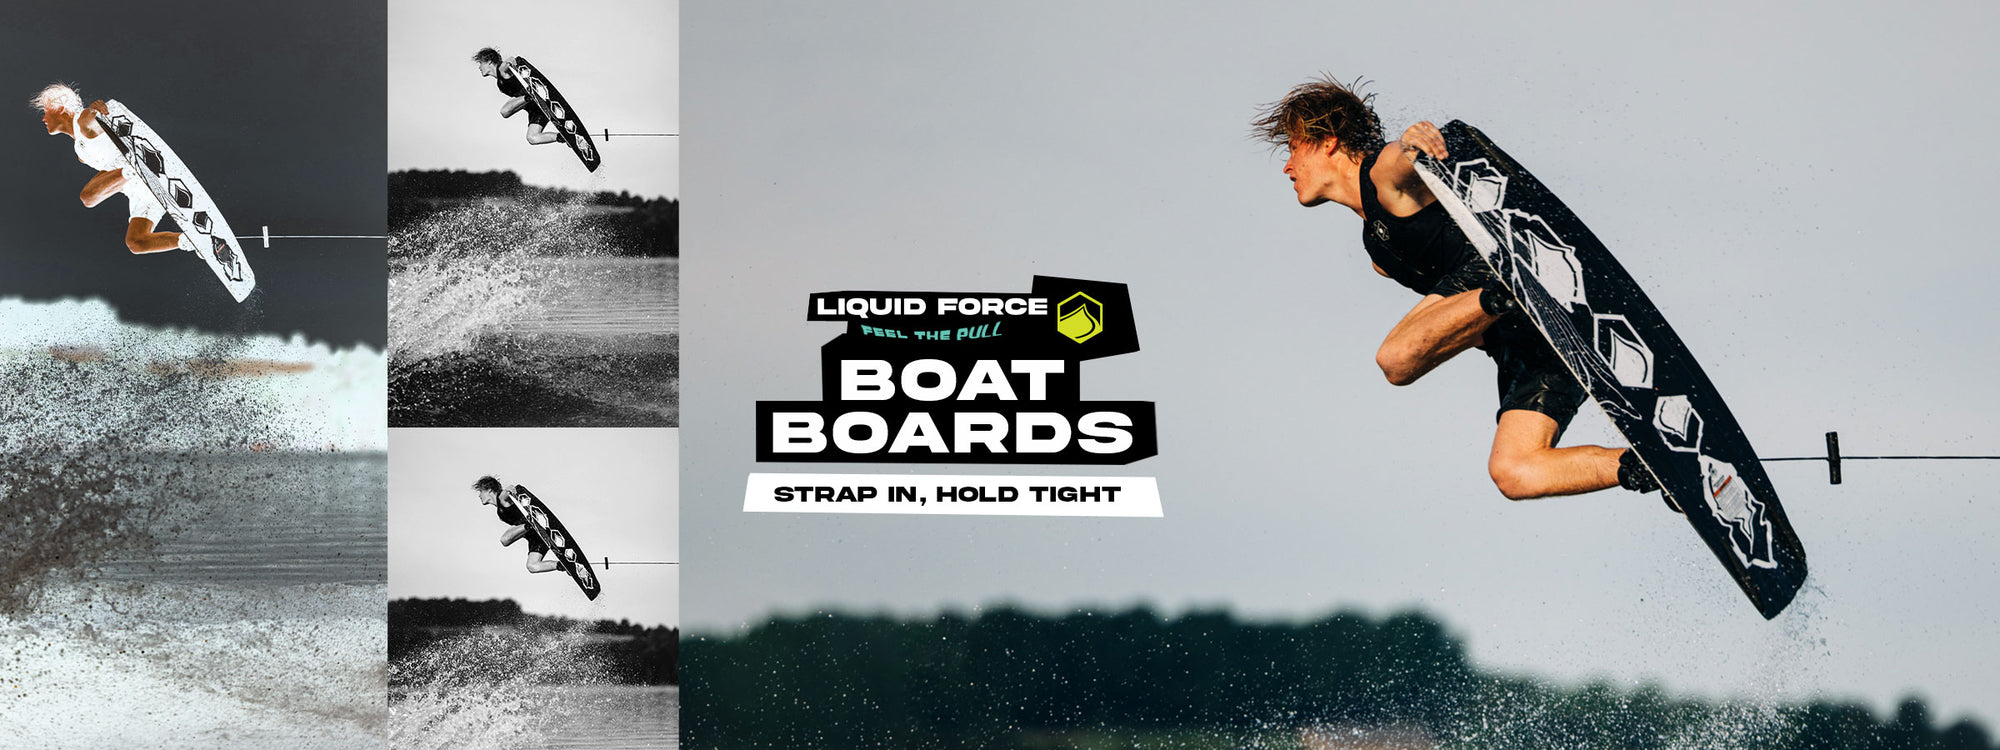 Liquid Force Boat Wakeboards